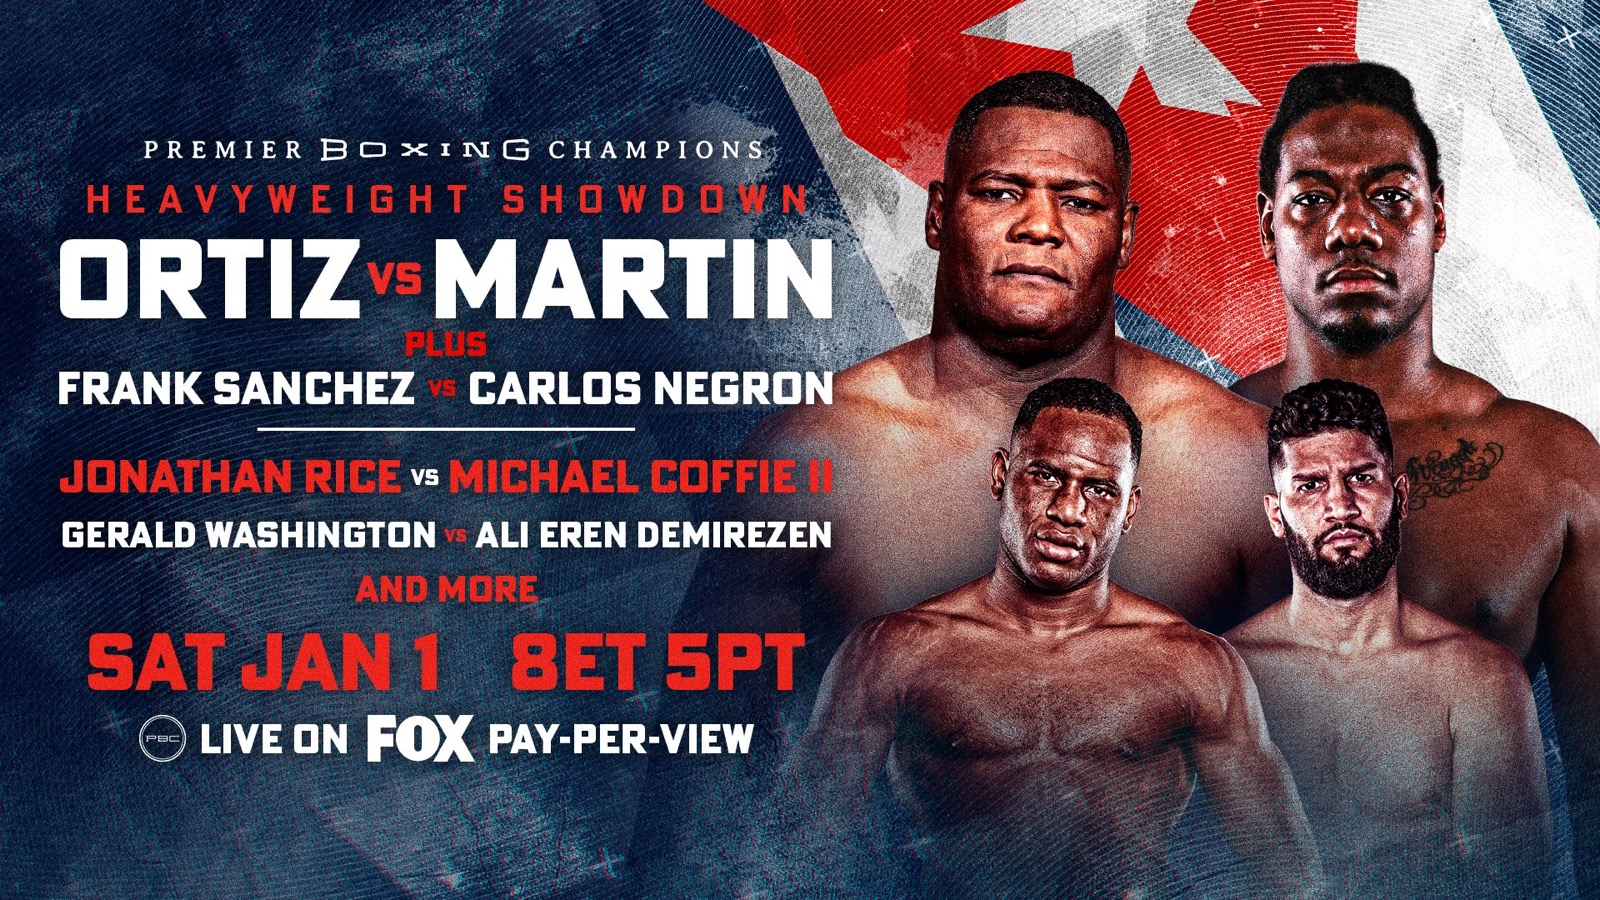 Quotes: Luis Ortiz vs. Charles Martin press conference for Jan.1st match on Fox Sports pay-per-view